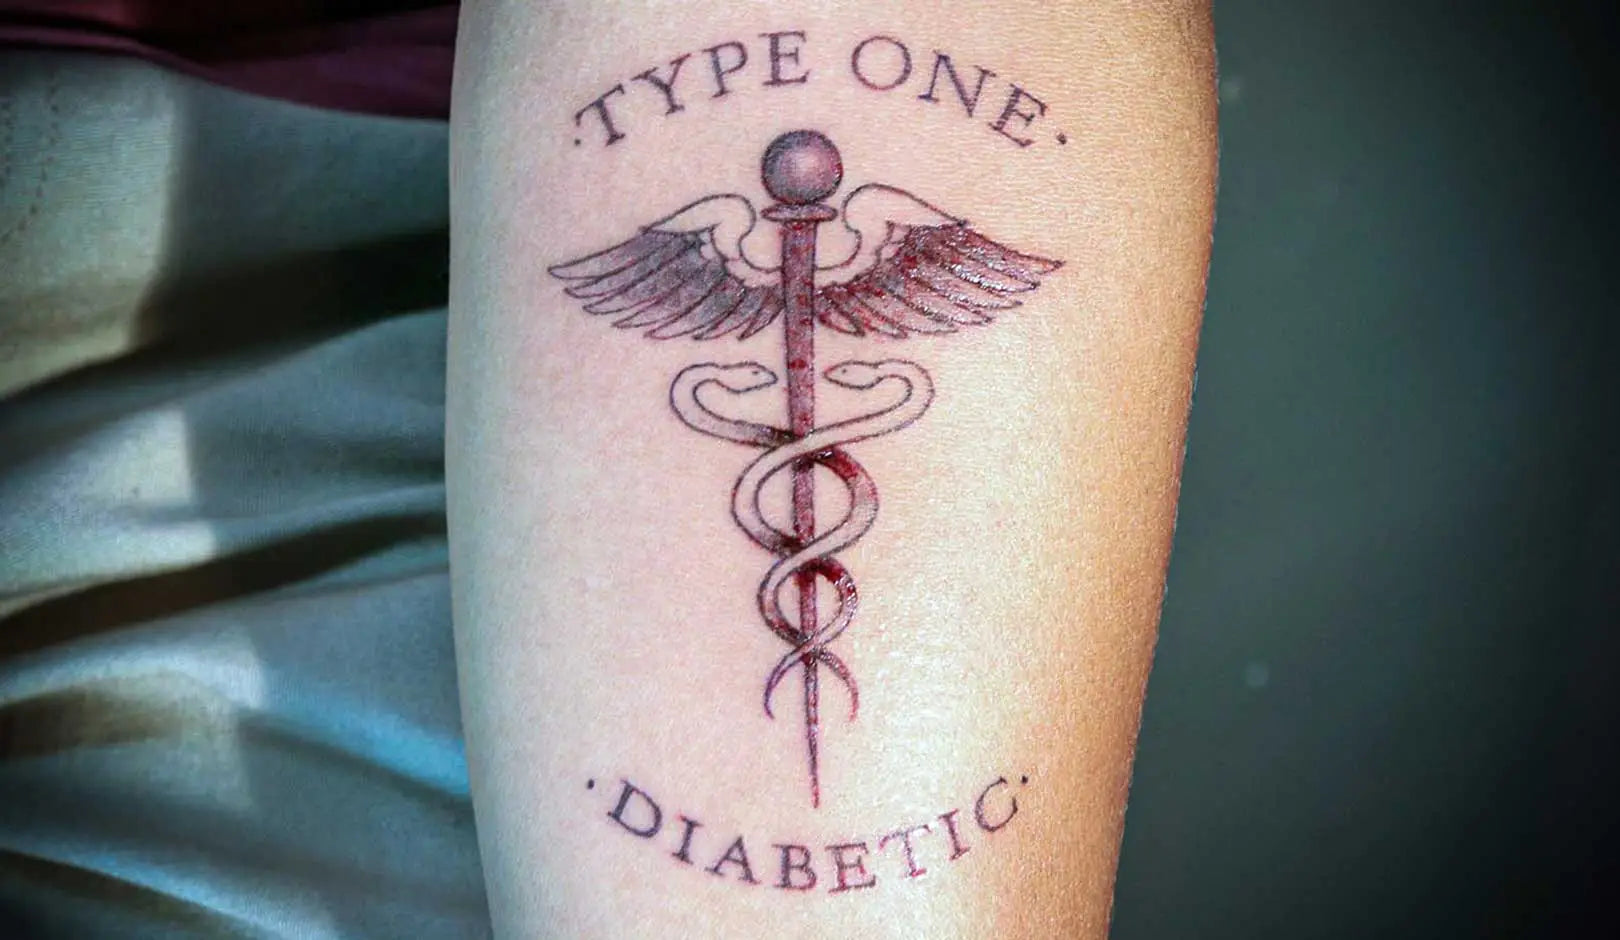 Tattoo uploaded by Kev-O- • My spin on the Type 1 Diabetes symbol 🤘🏼 •  Tattoodo